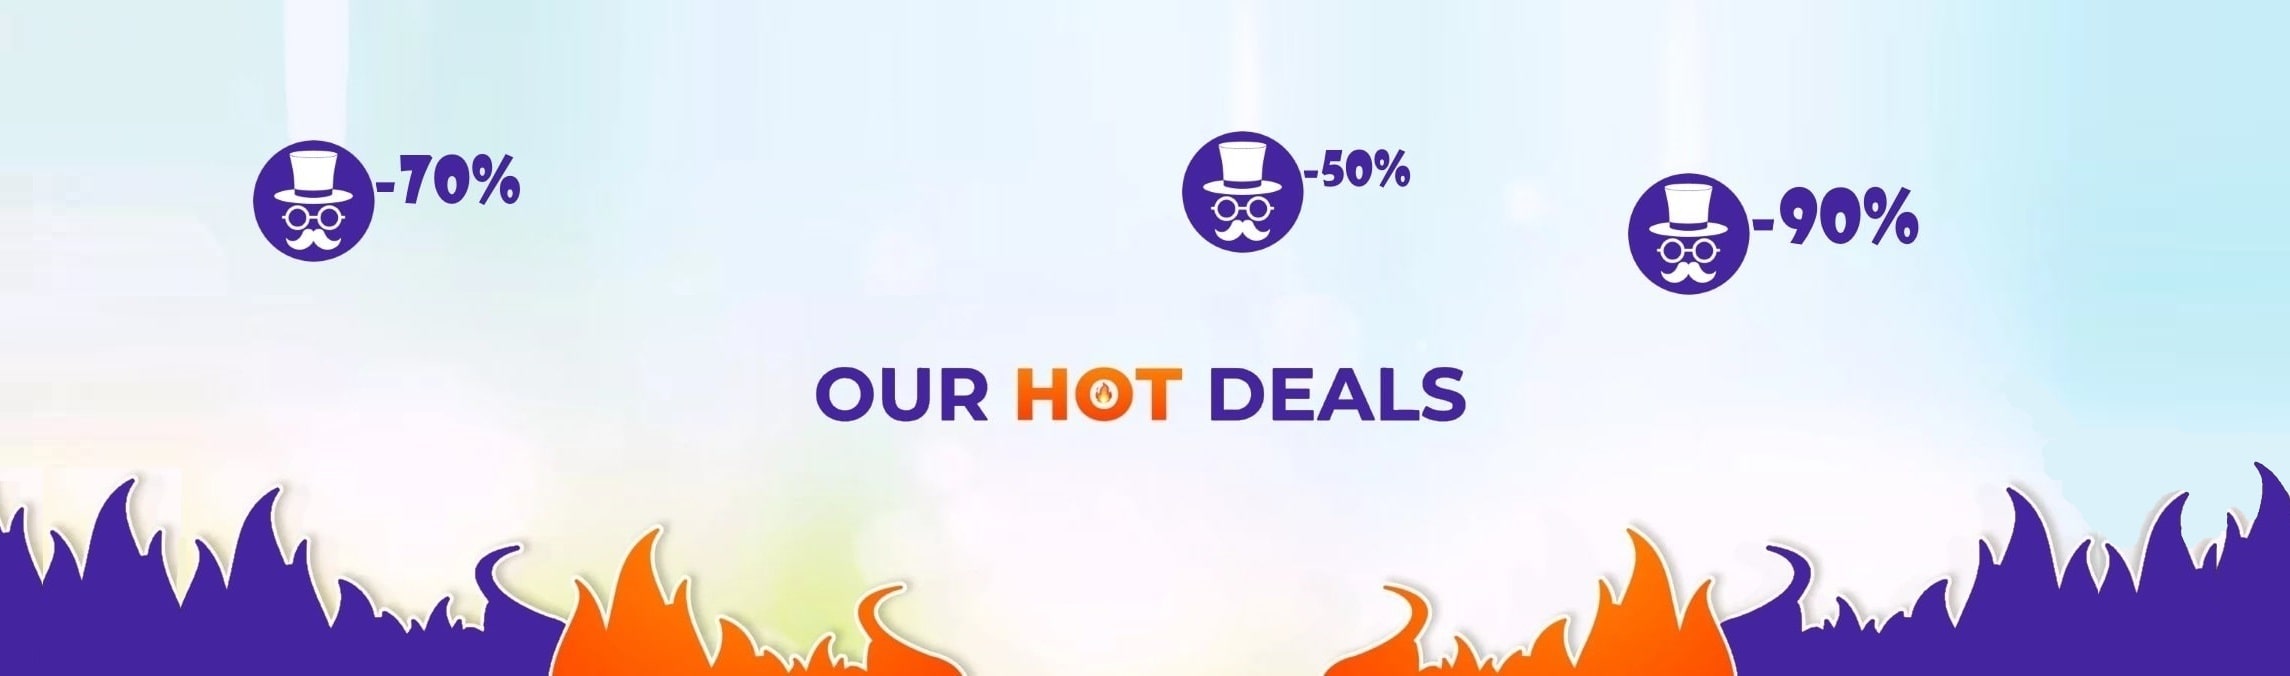 Discover scorching hot deals on Tophatter! Experience the thrill of snagging incredible discounts on a wide range of products, from electronics to fashion, home goods, and more. Don't miss out on these sizzling offers - shop now and save big!